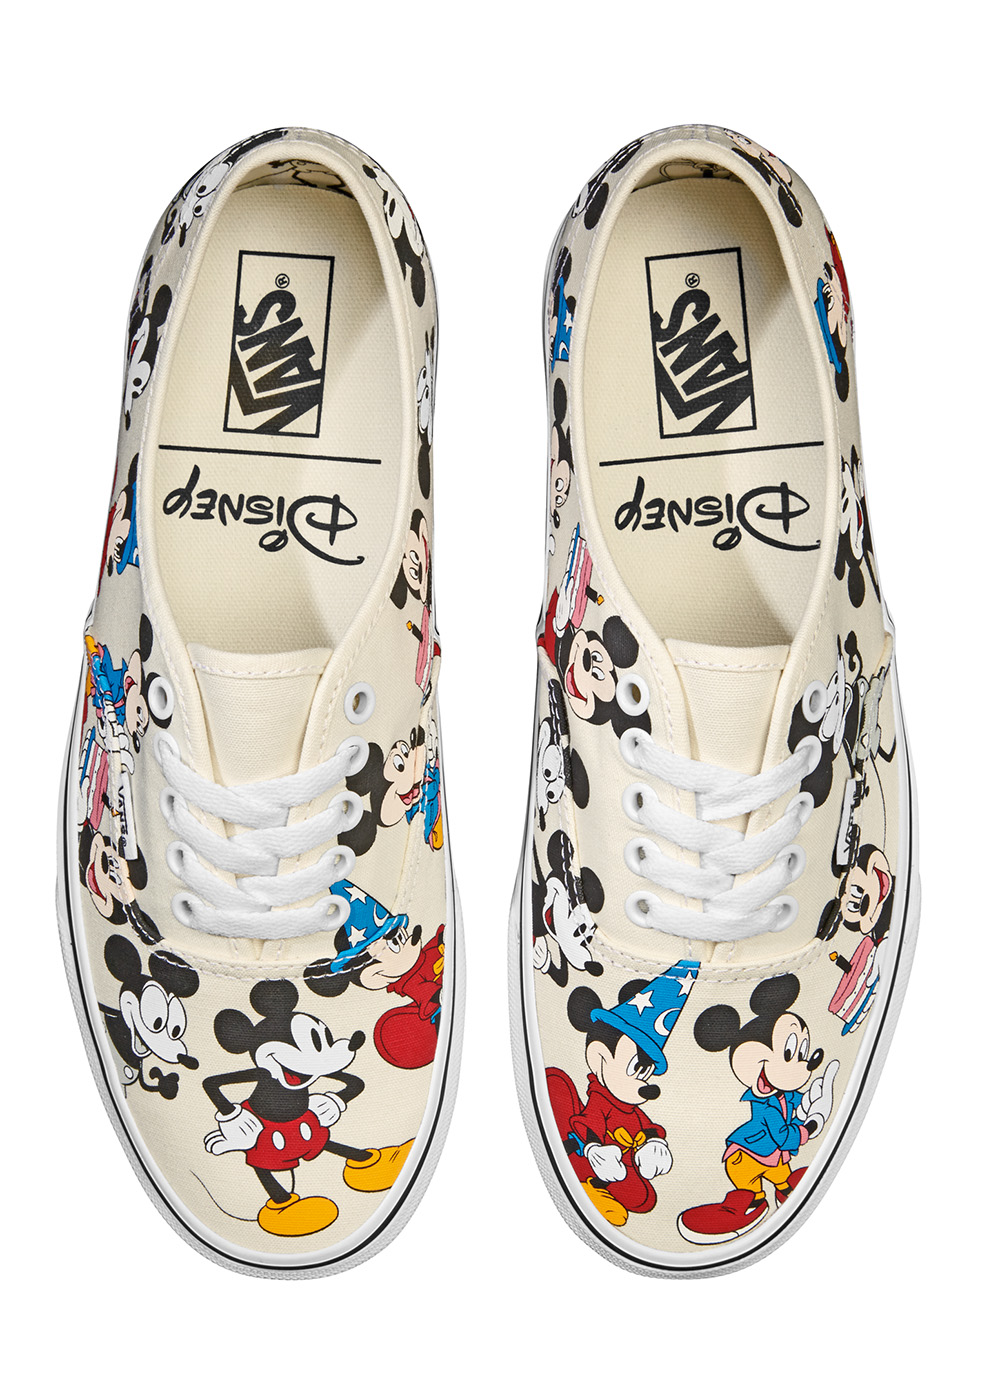 Vans Revisits Mickey Mouse Through The 